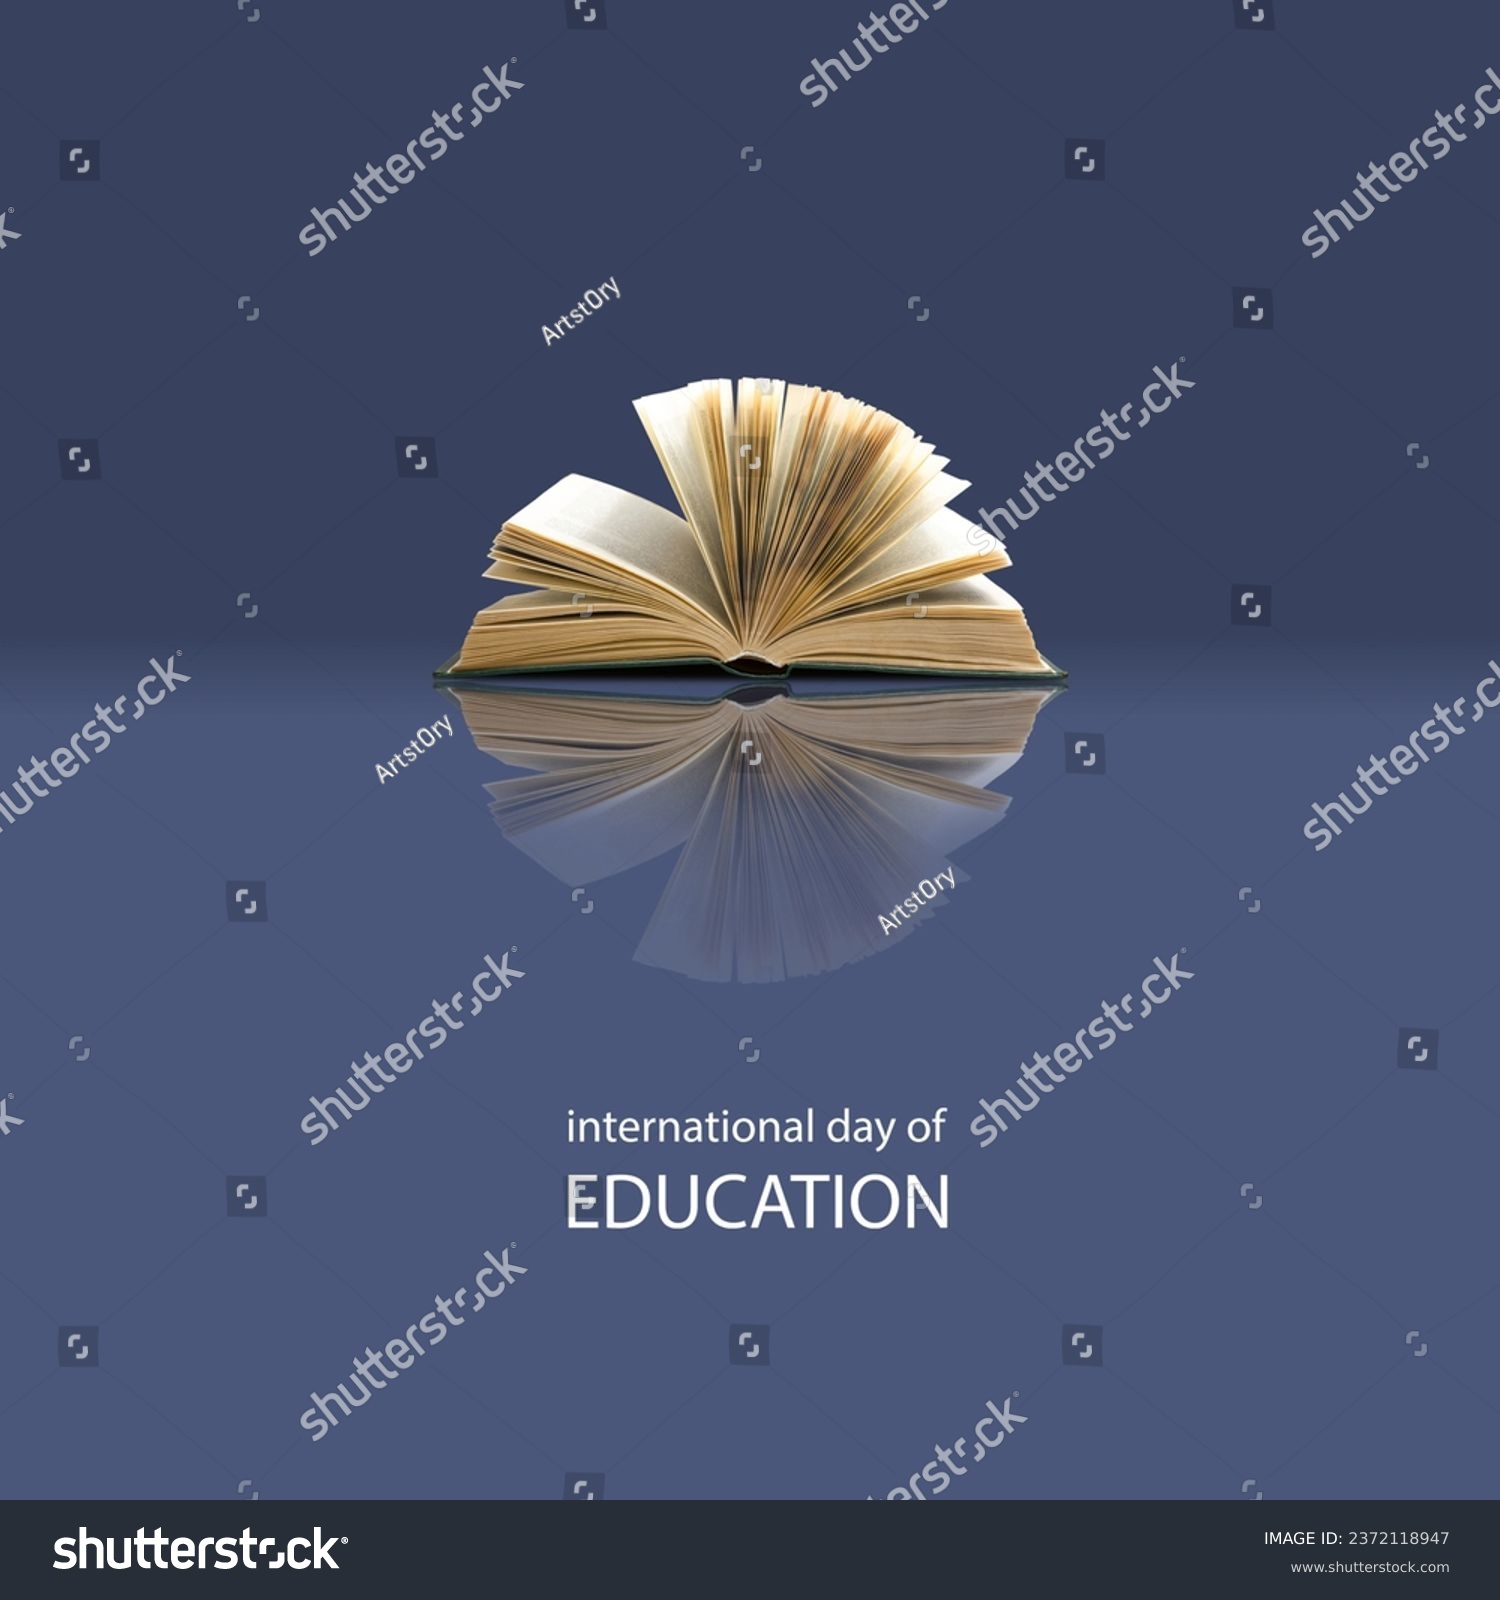 International Day of Education concept Illustration.globe shape book. Reading imagination concept for education holiday. #2372118947